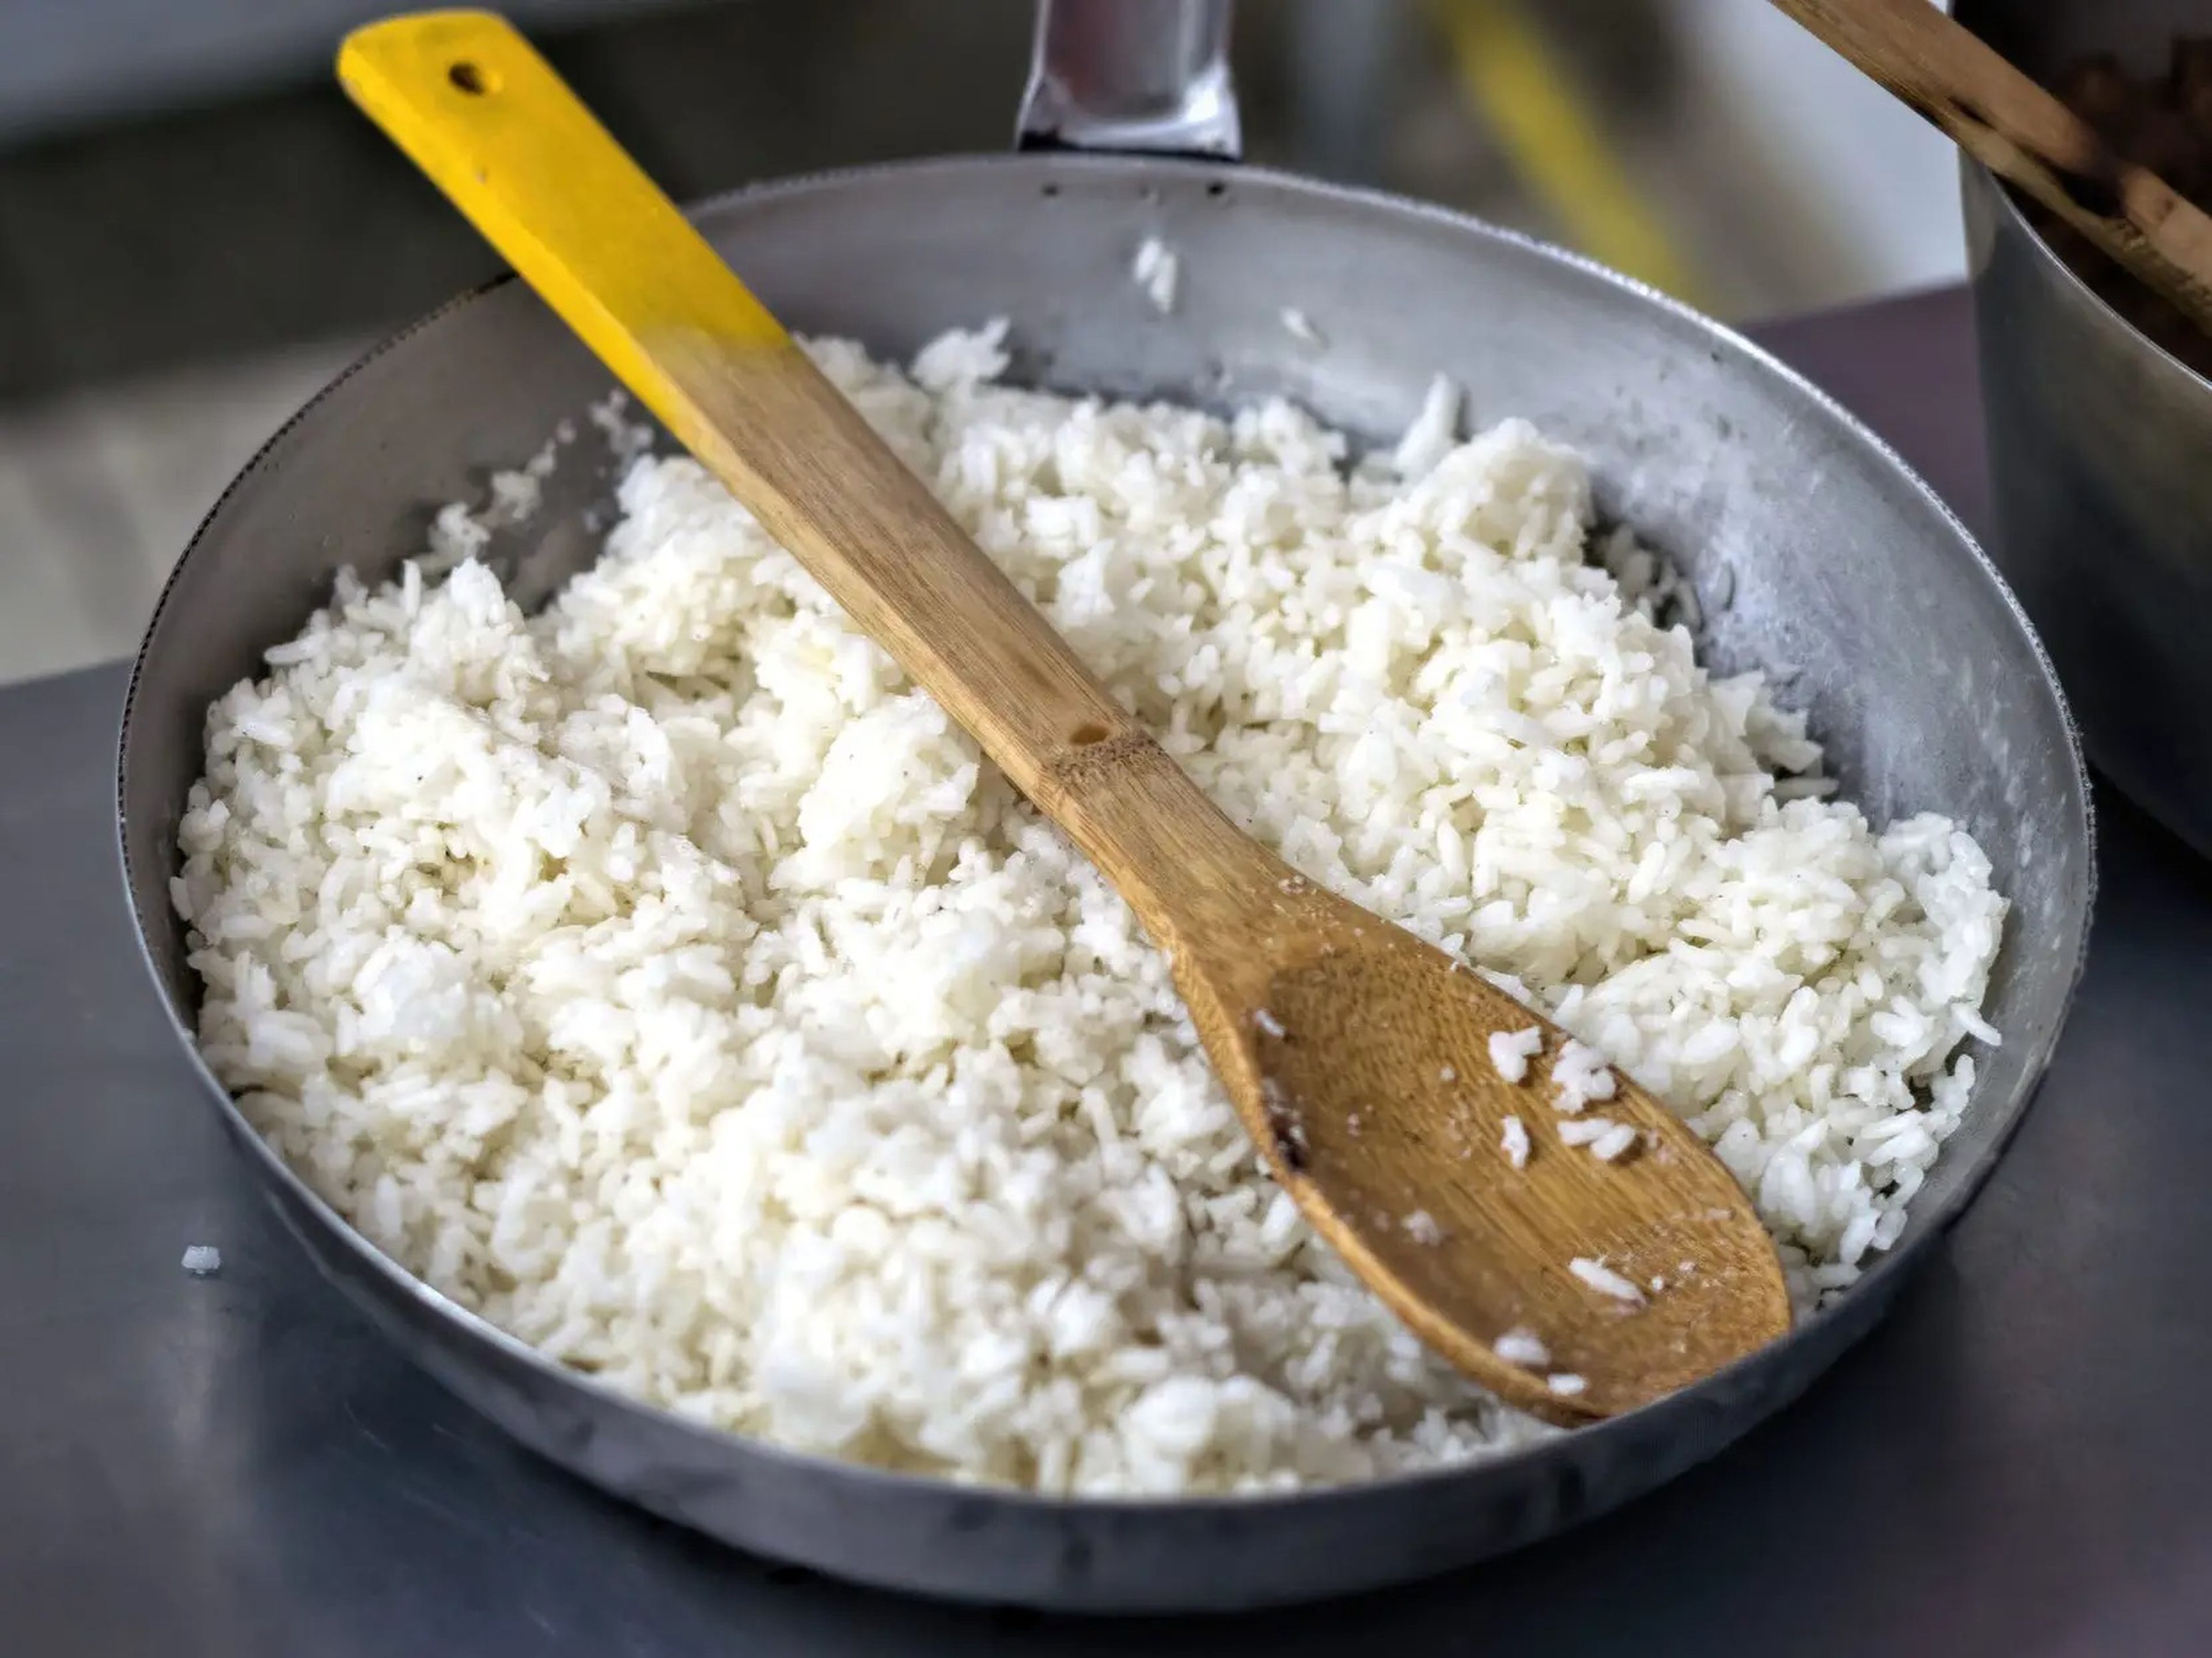 a frying pan full of cooked white rice resting on a countertop with a wooden spoon in the middle of the pan